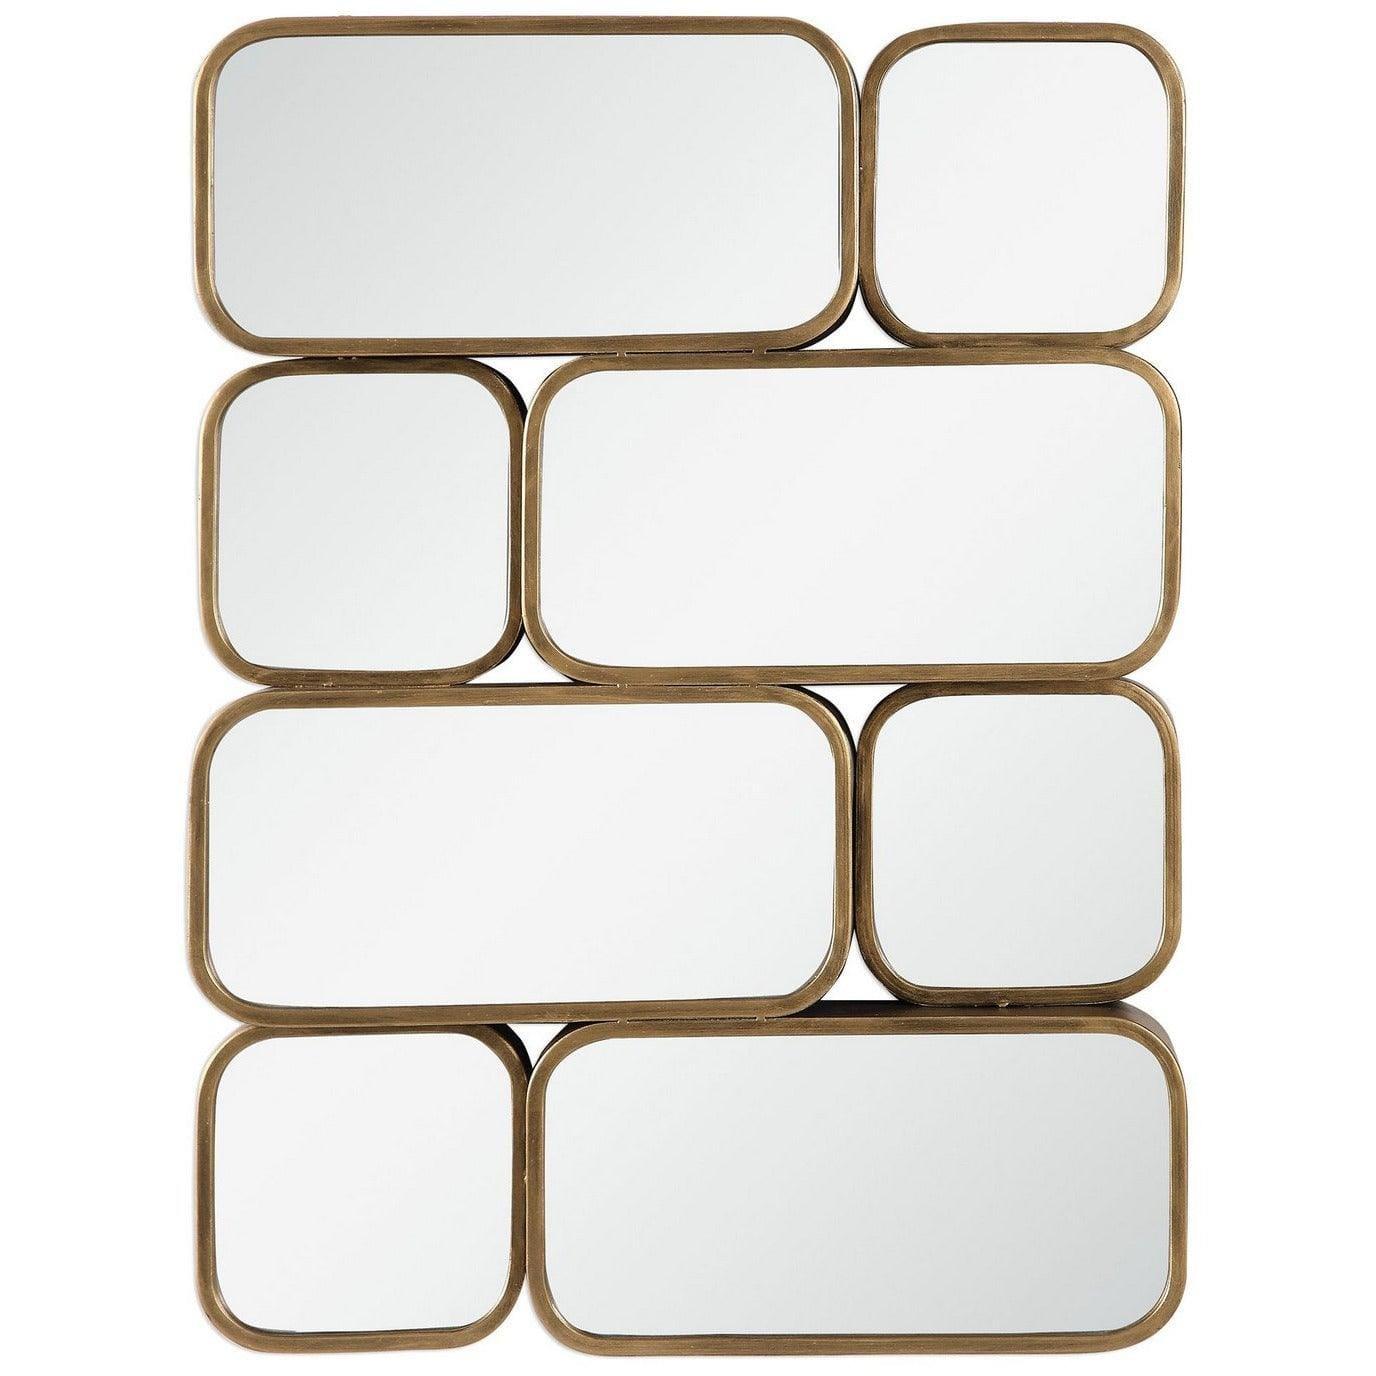 The Uttermost - Canute Mirror - 09437 | Montreal Lighting & Hardware